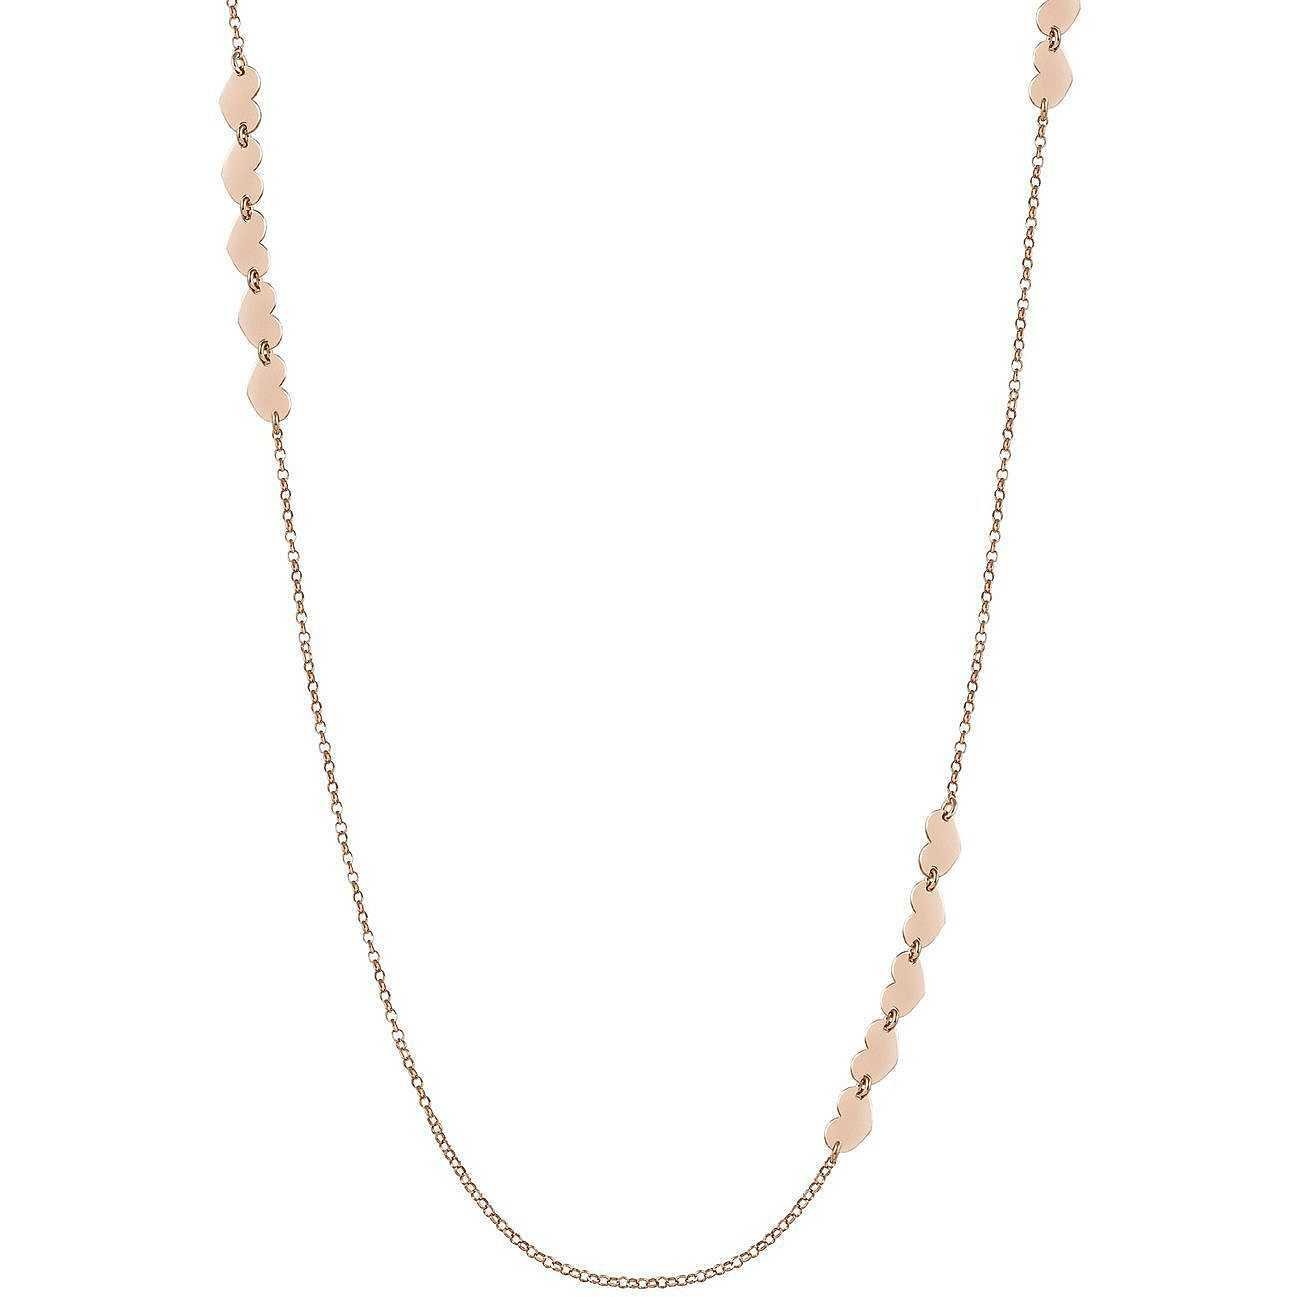 Susan Lucci Launches Heart Necklace Jewelry on Today With Hoda & Jenna